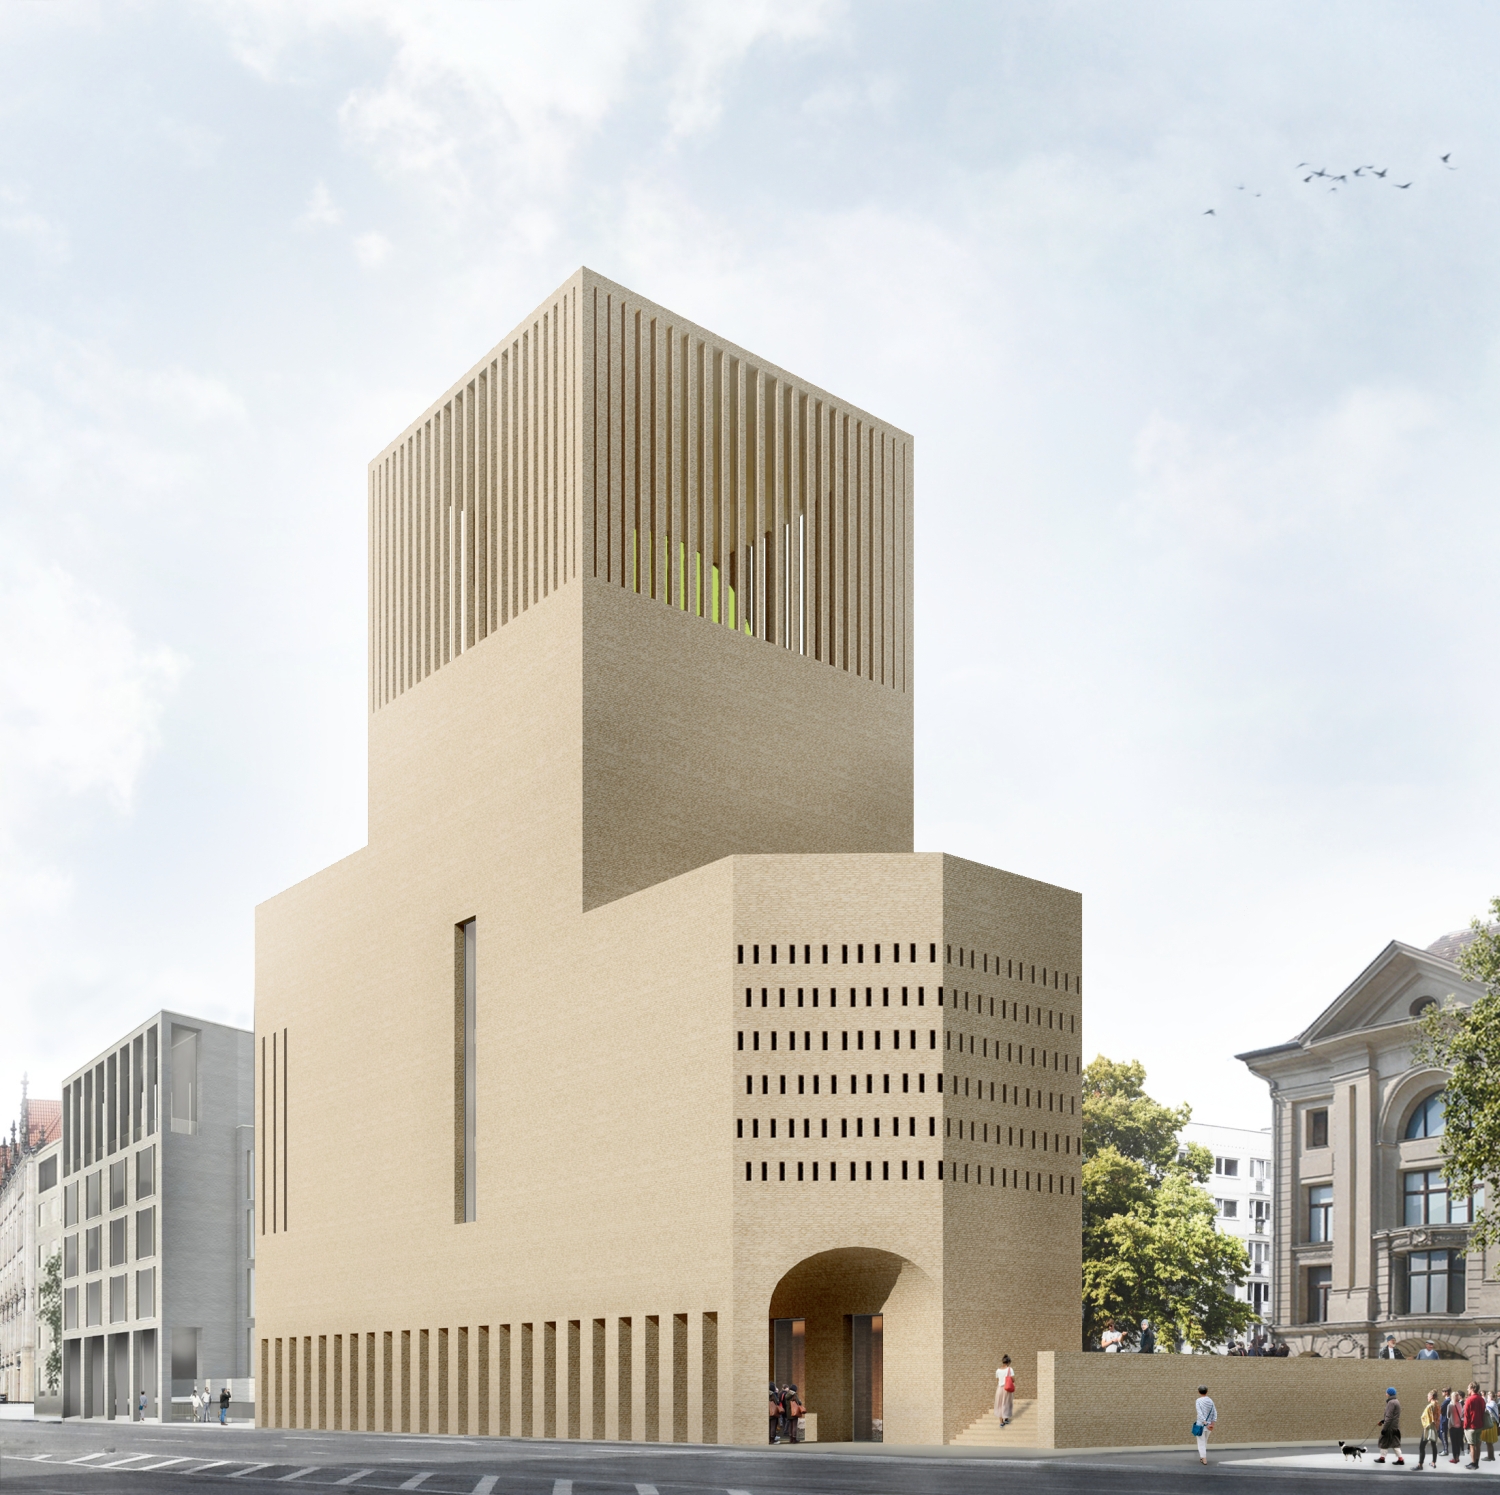 House of One - Architect's rendering of the exterior of the structure on&nbsp;Gertraudenstrasse